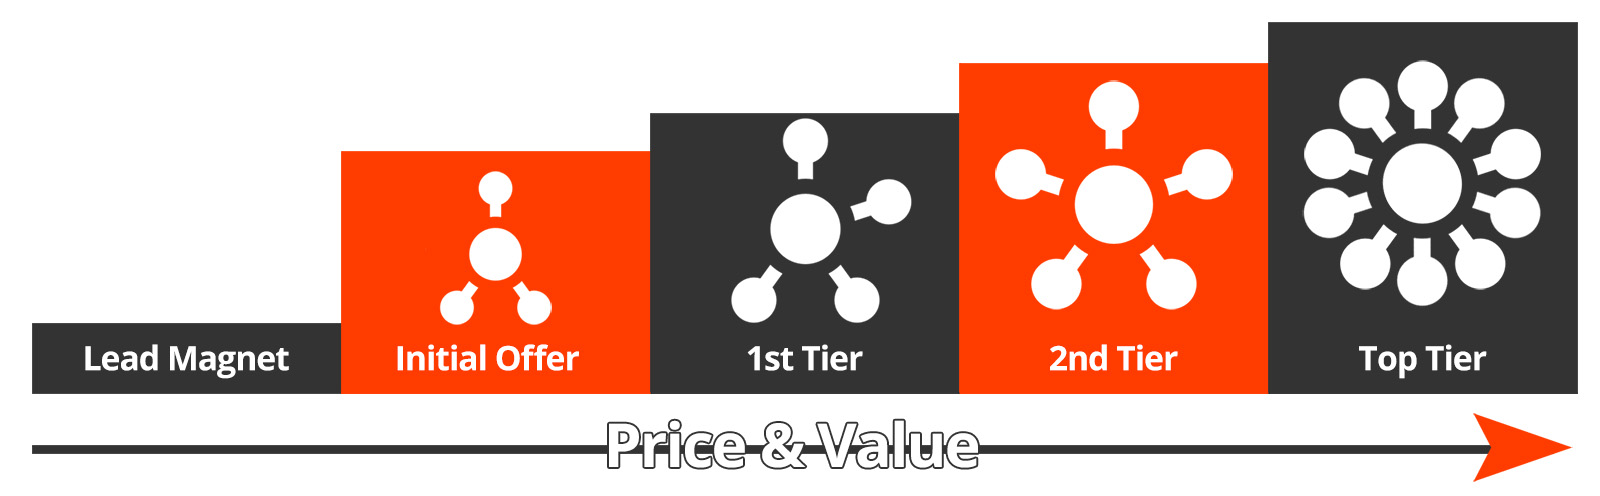 The Value Ladder - Physical Products